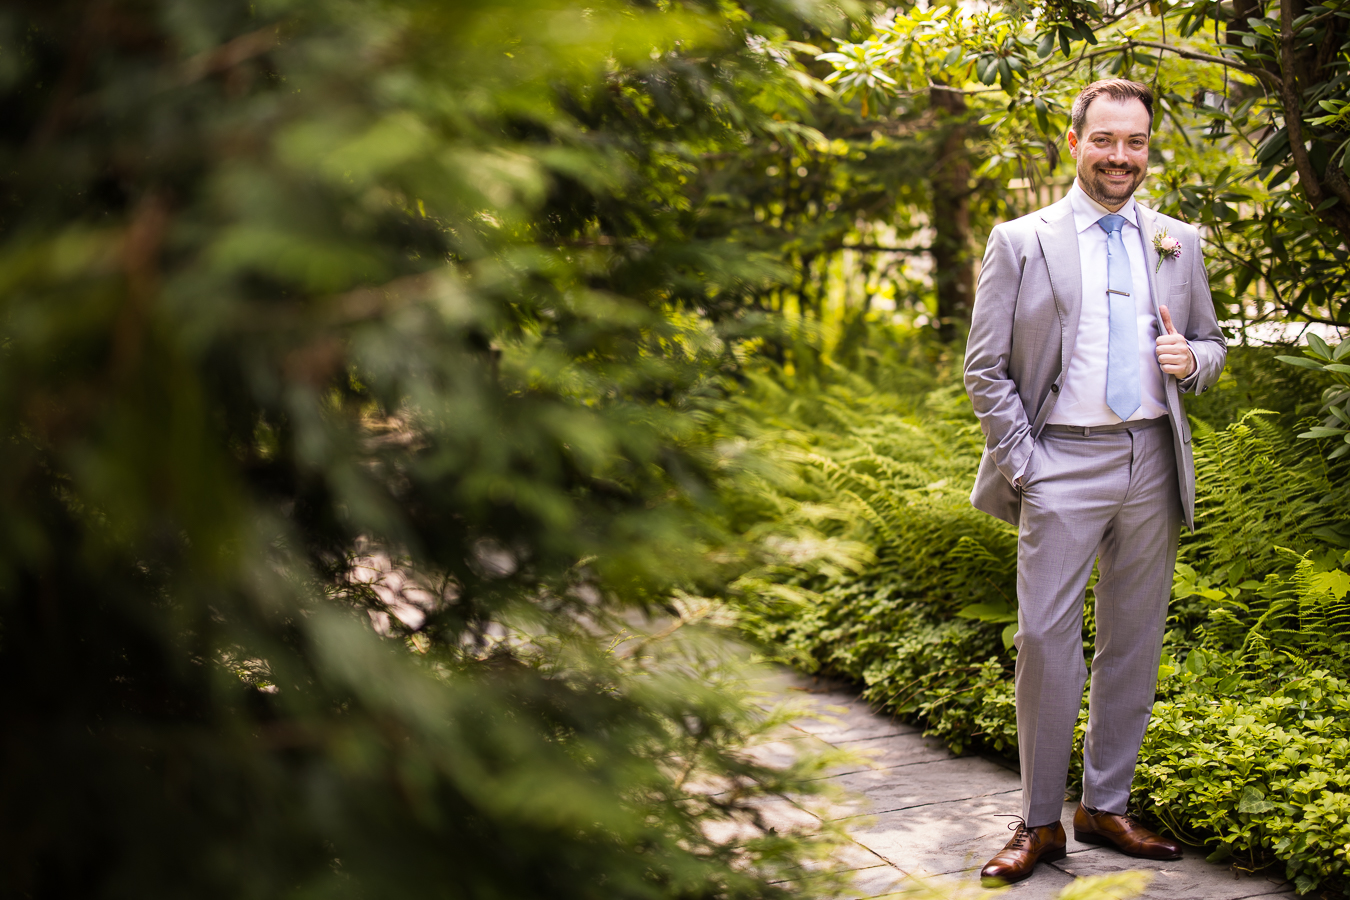 Holly Hedge Estate Wedding Photographer, lisa rhinehart, captures this image of the groom as he stands amongst the greenery smiling at the camera before his wedding ceremony 